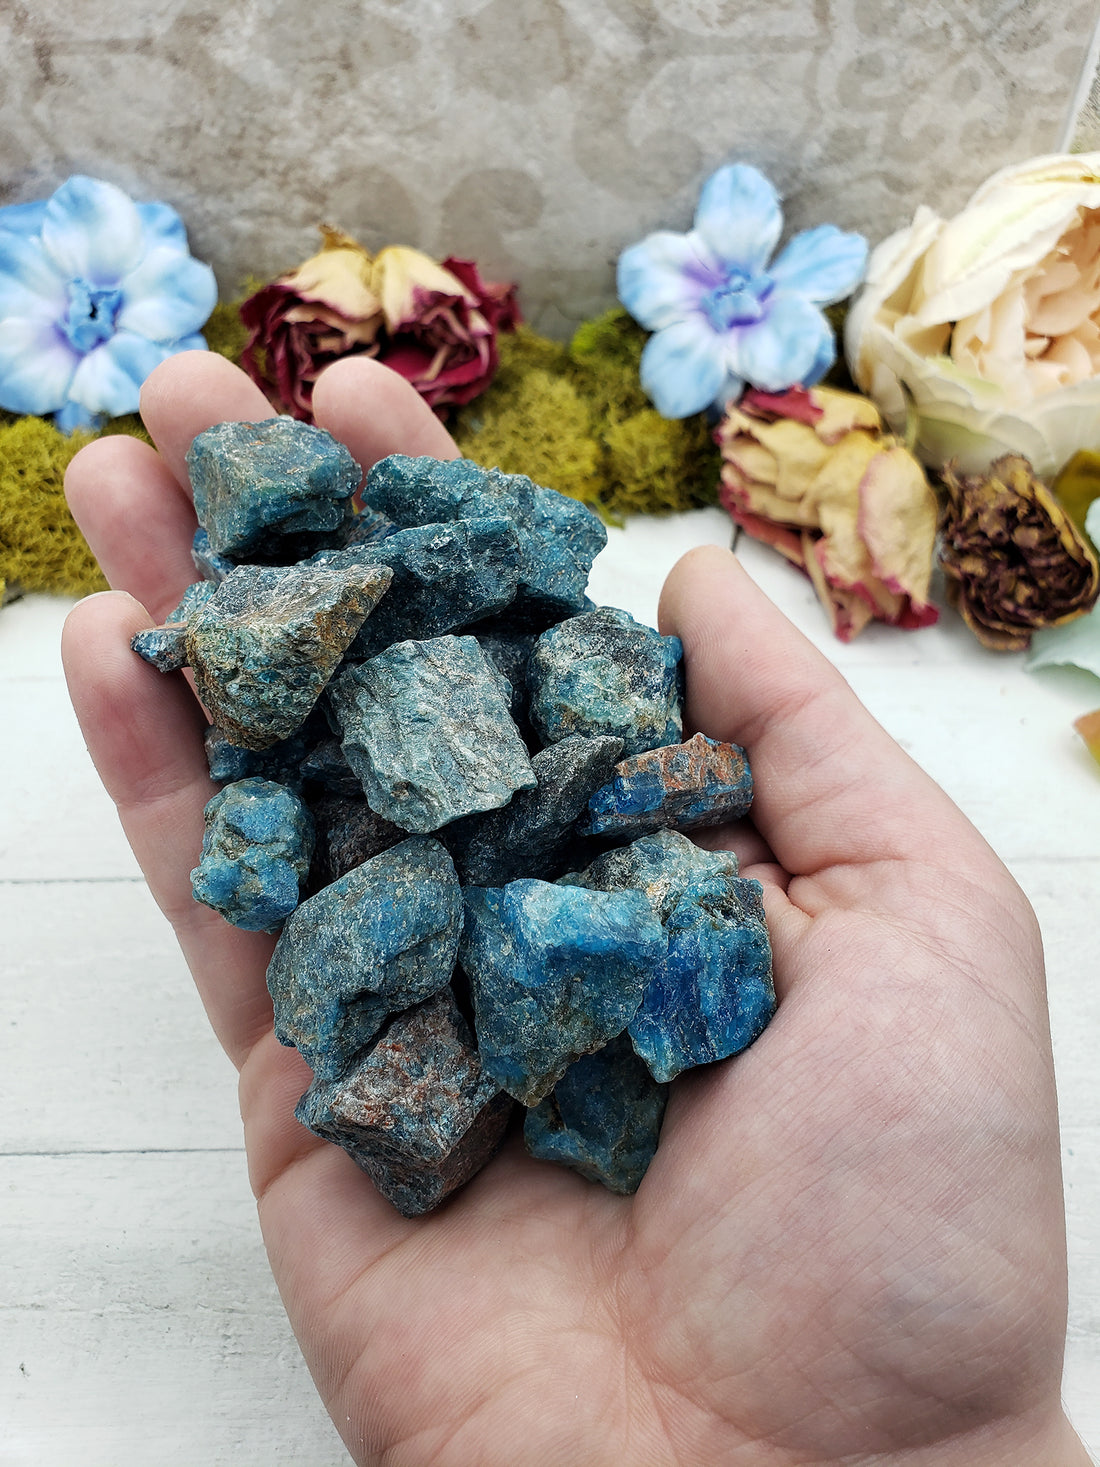 Hand holding several rough blue apatite stones